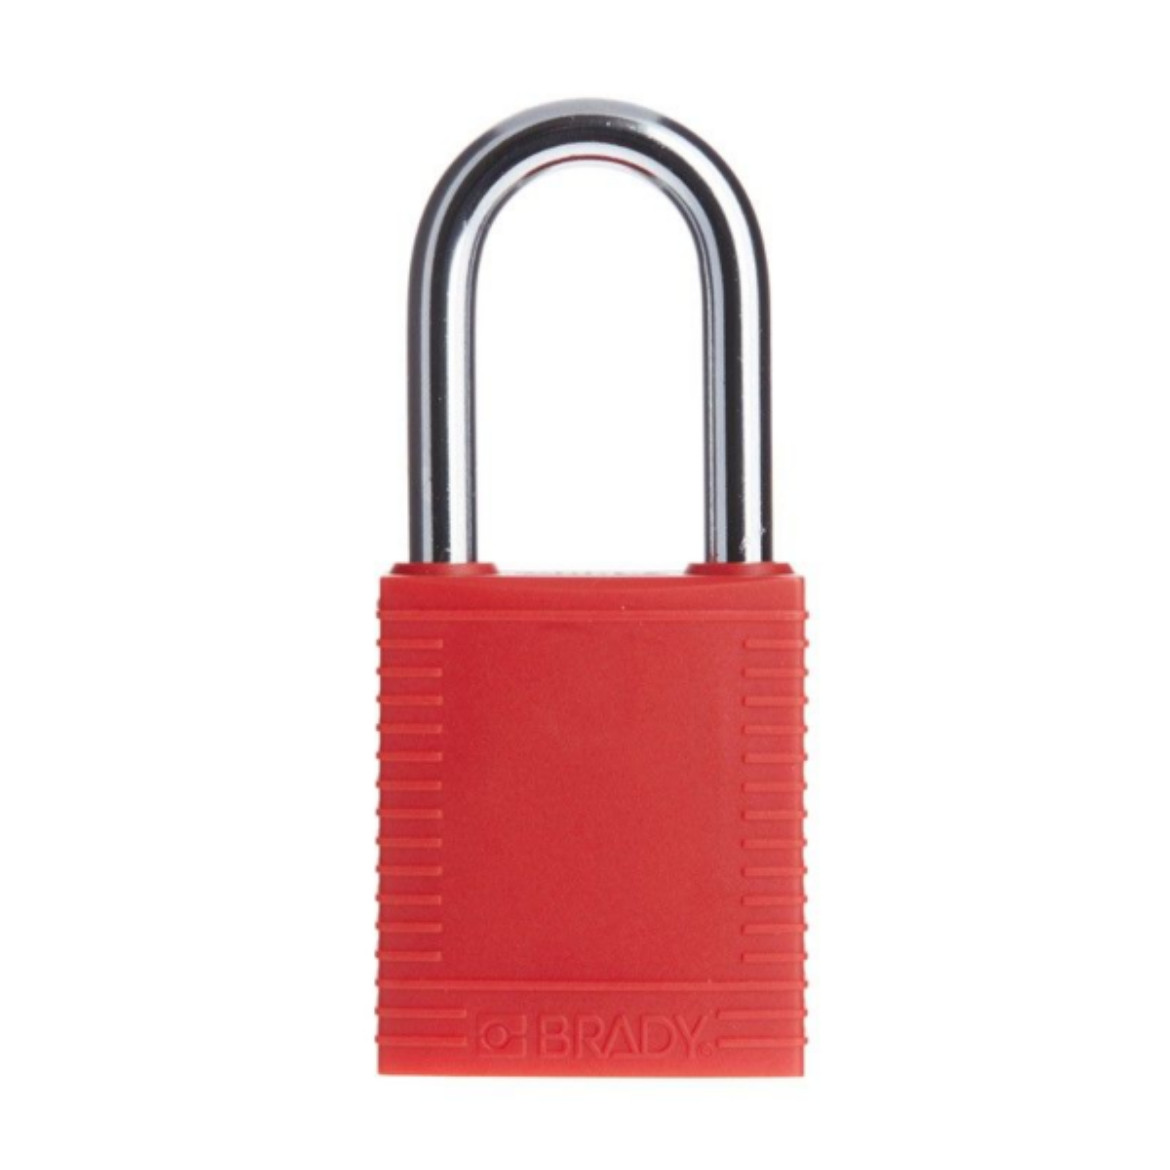 Picture of BRADY SAFETY PLUS PADLOCK RED - TWO KEYS